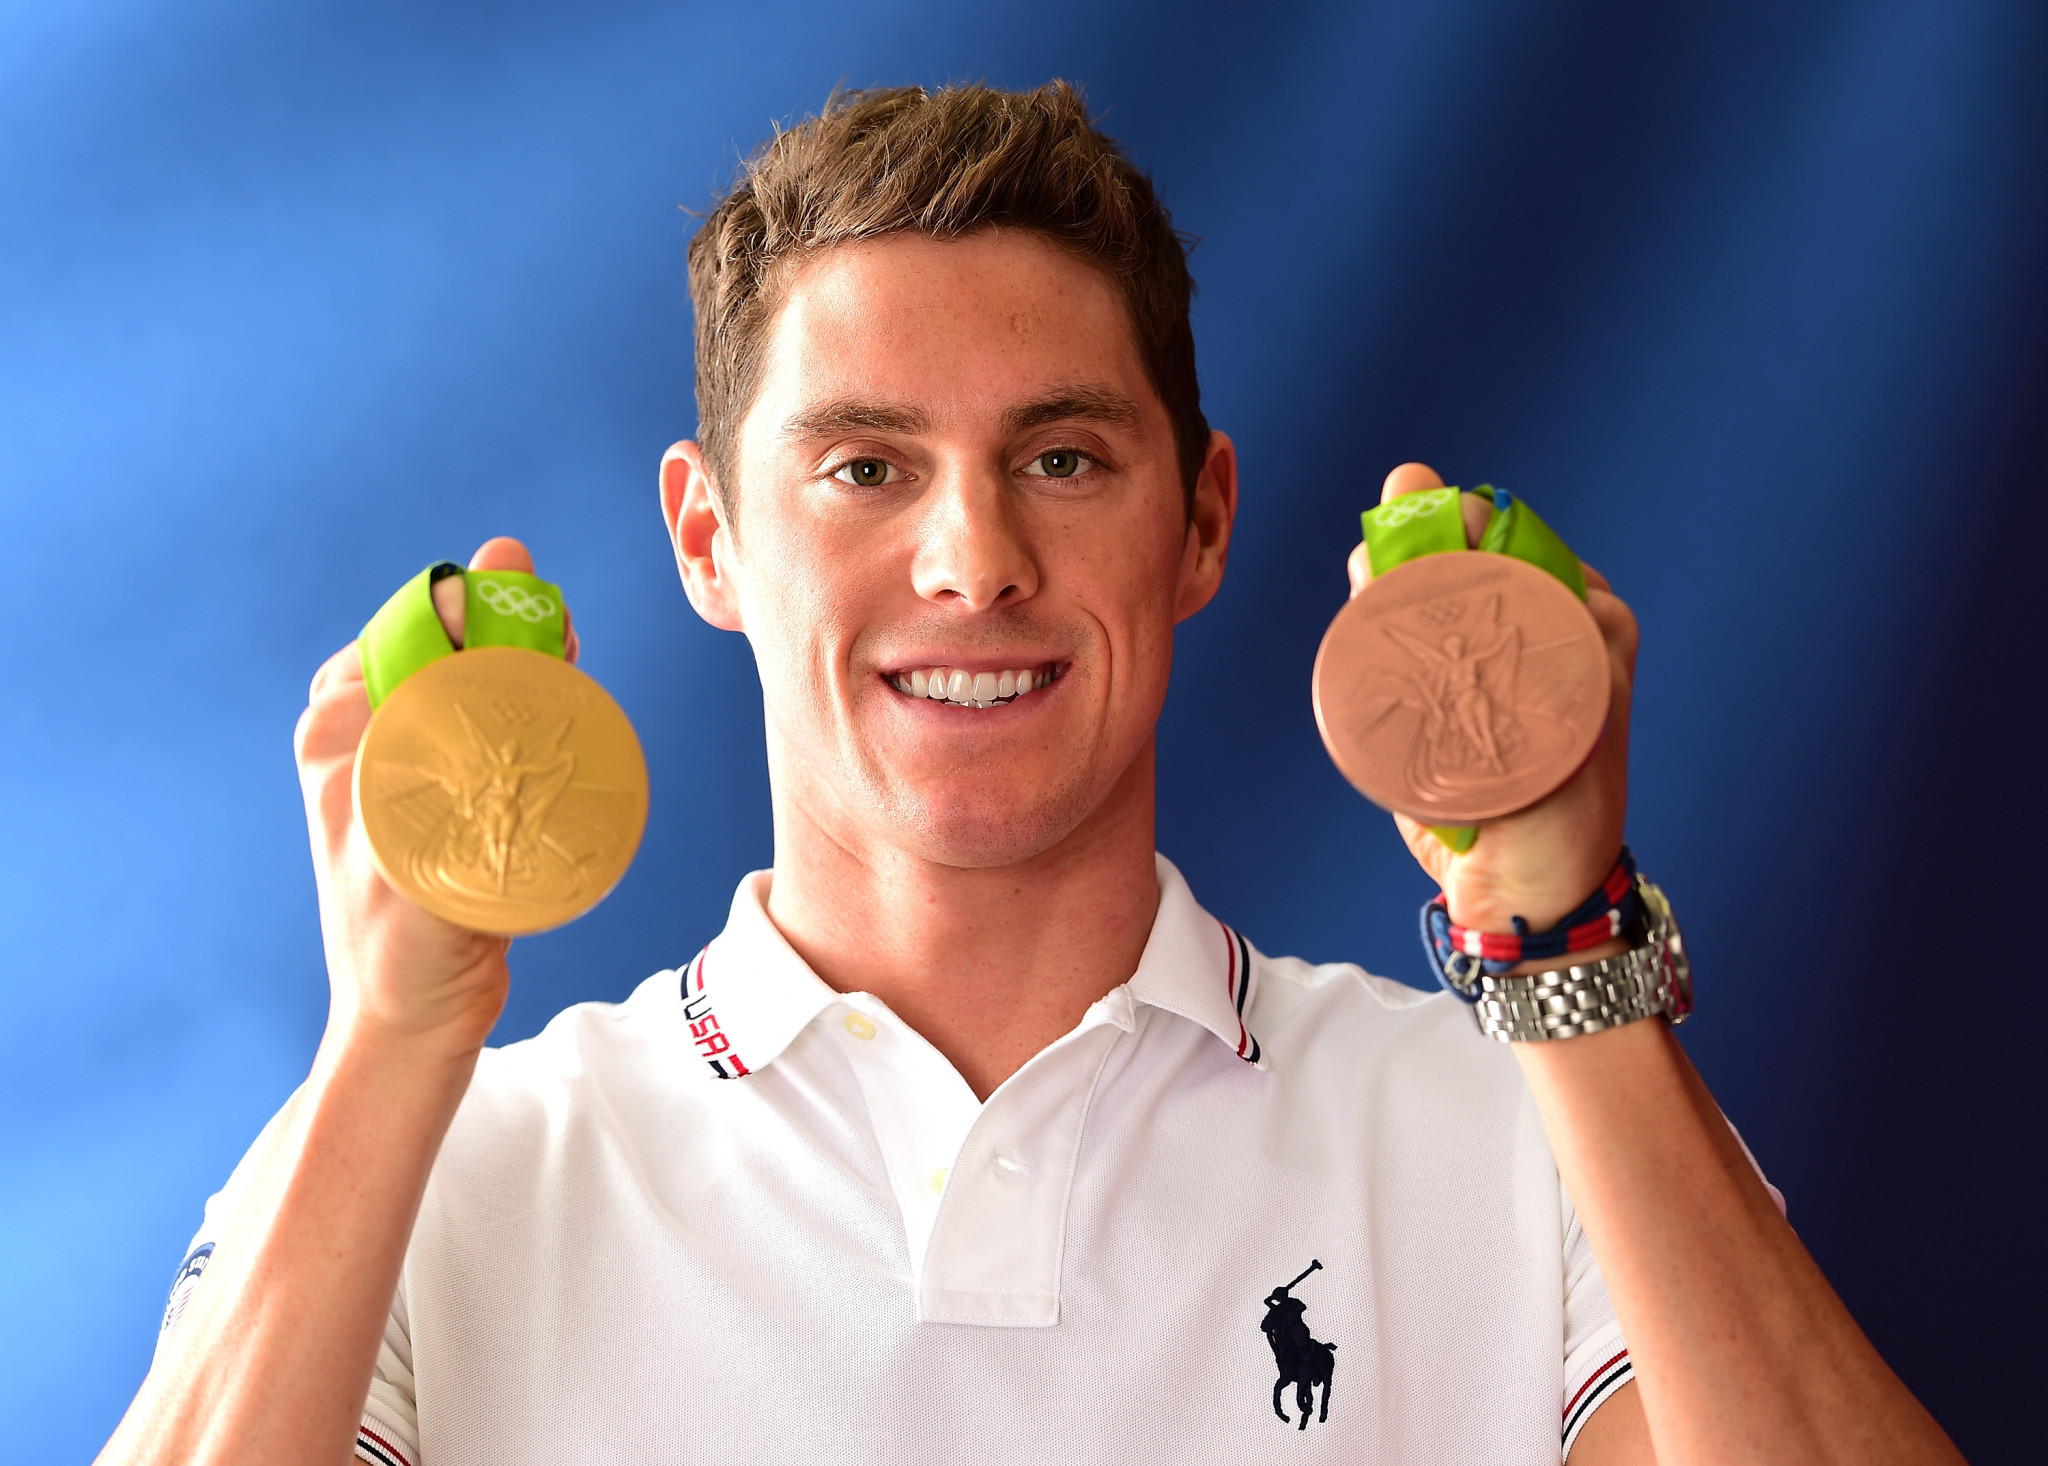 Conor Dwyer won relay gold and individual bronze at the 2016 Olympic Games in Rio ©Getty Images